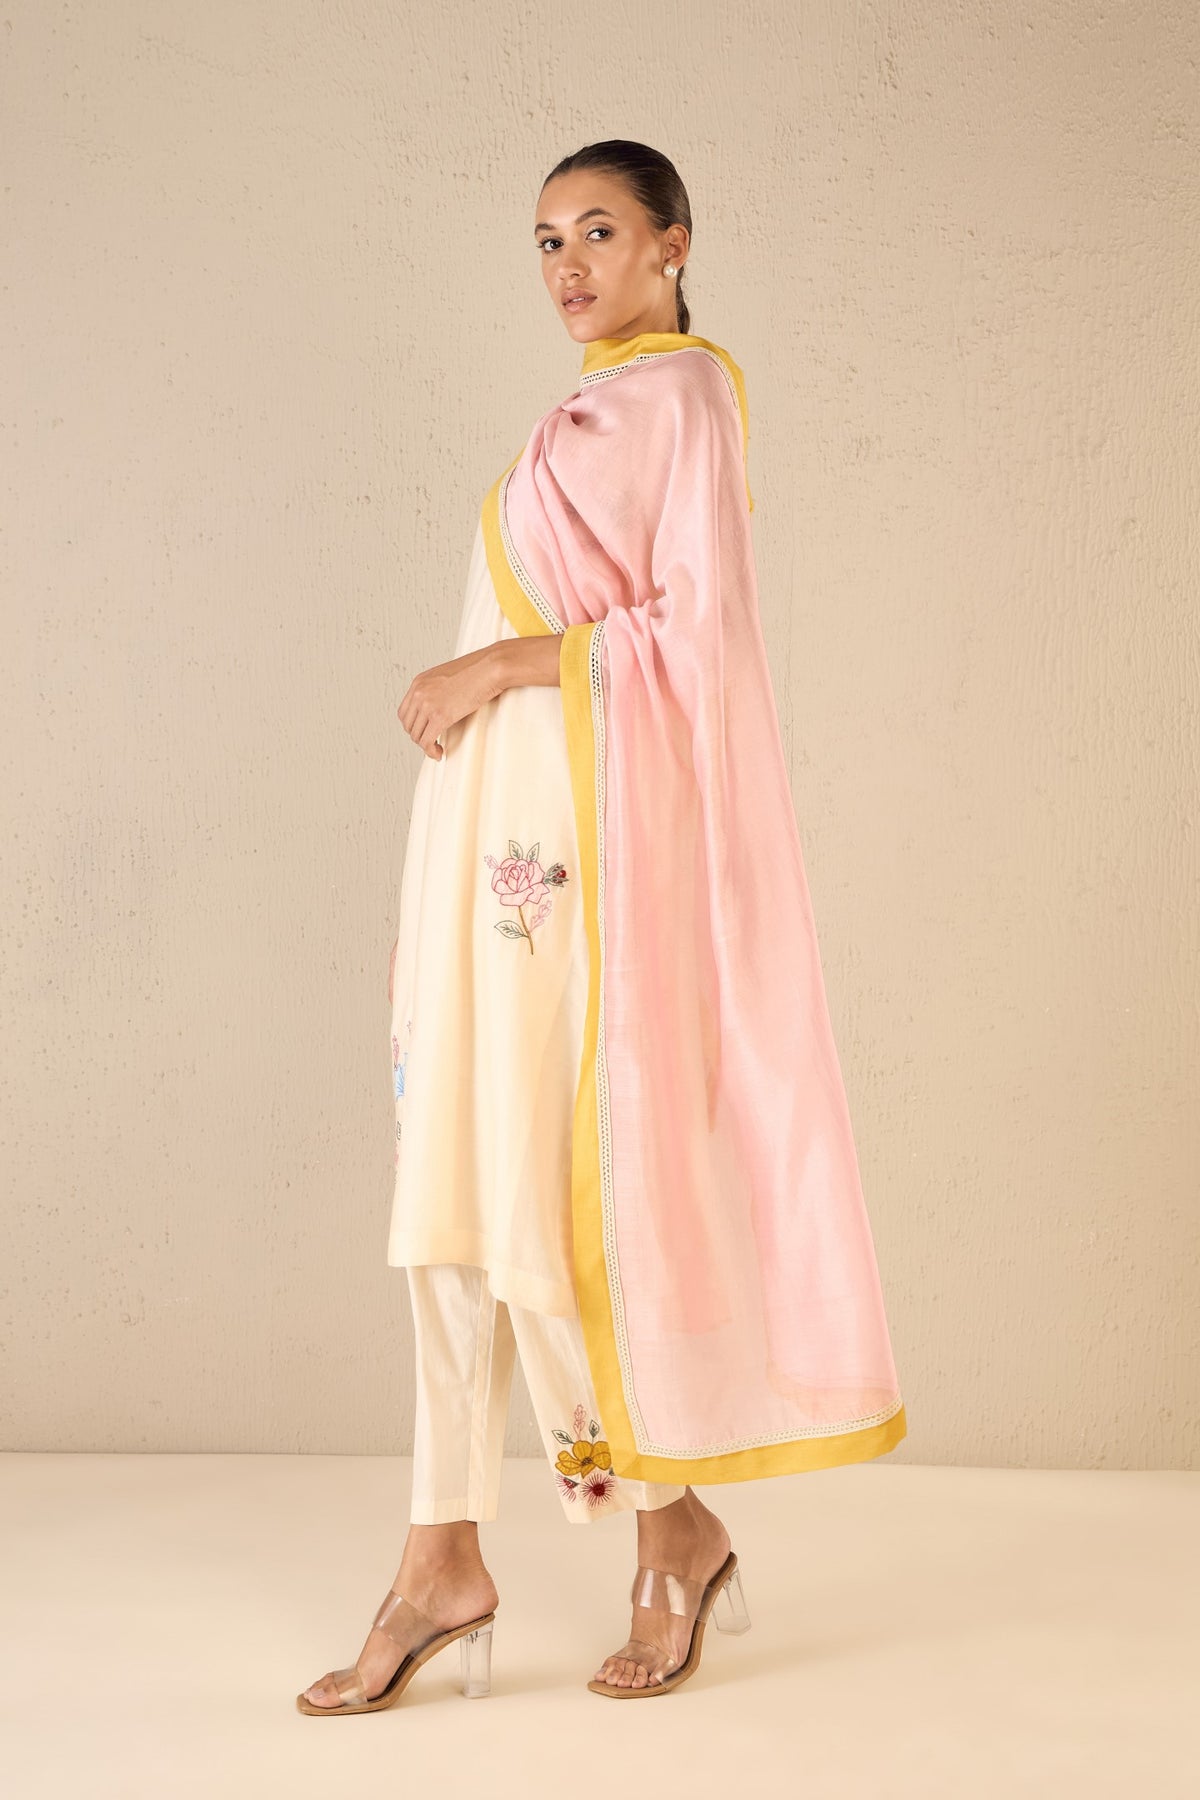 FLORAL MOSIAC: PINK & MUSTARD COLOR BLOCK DUPATTA WITH LACE DETAILING